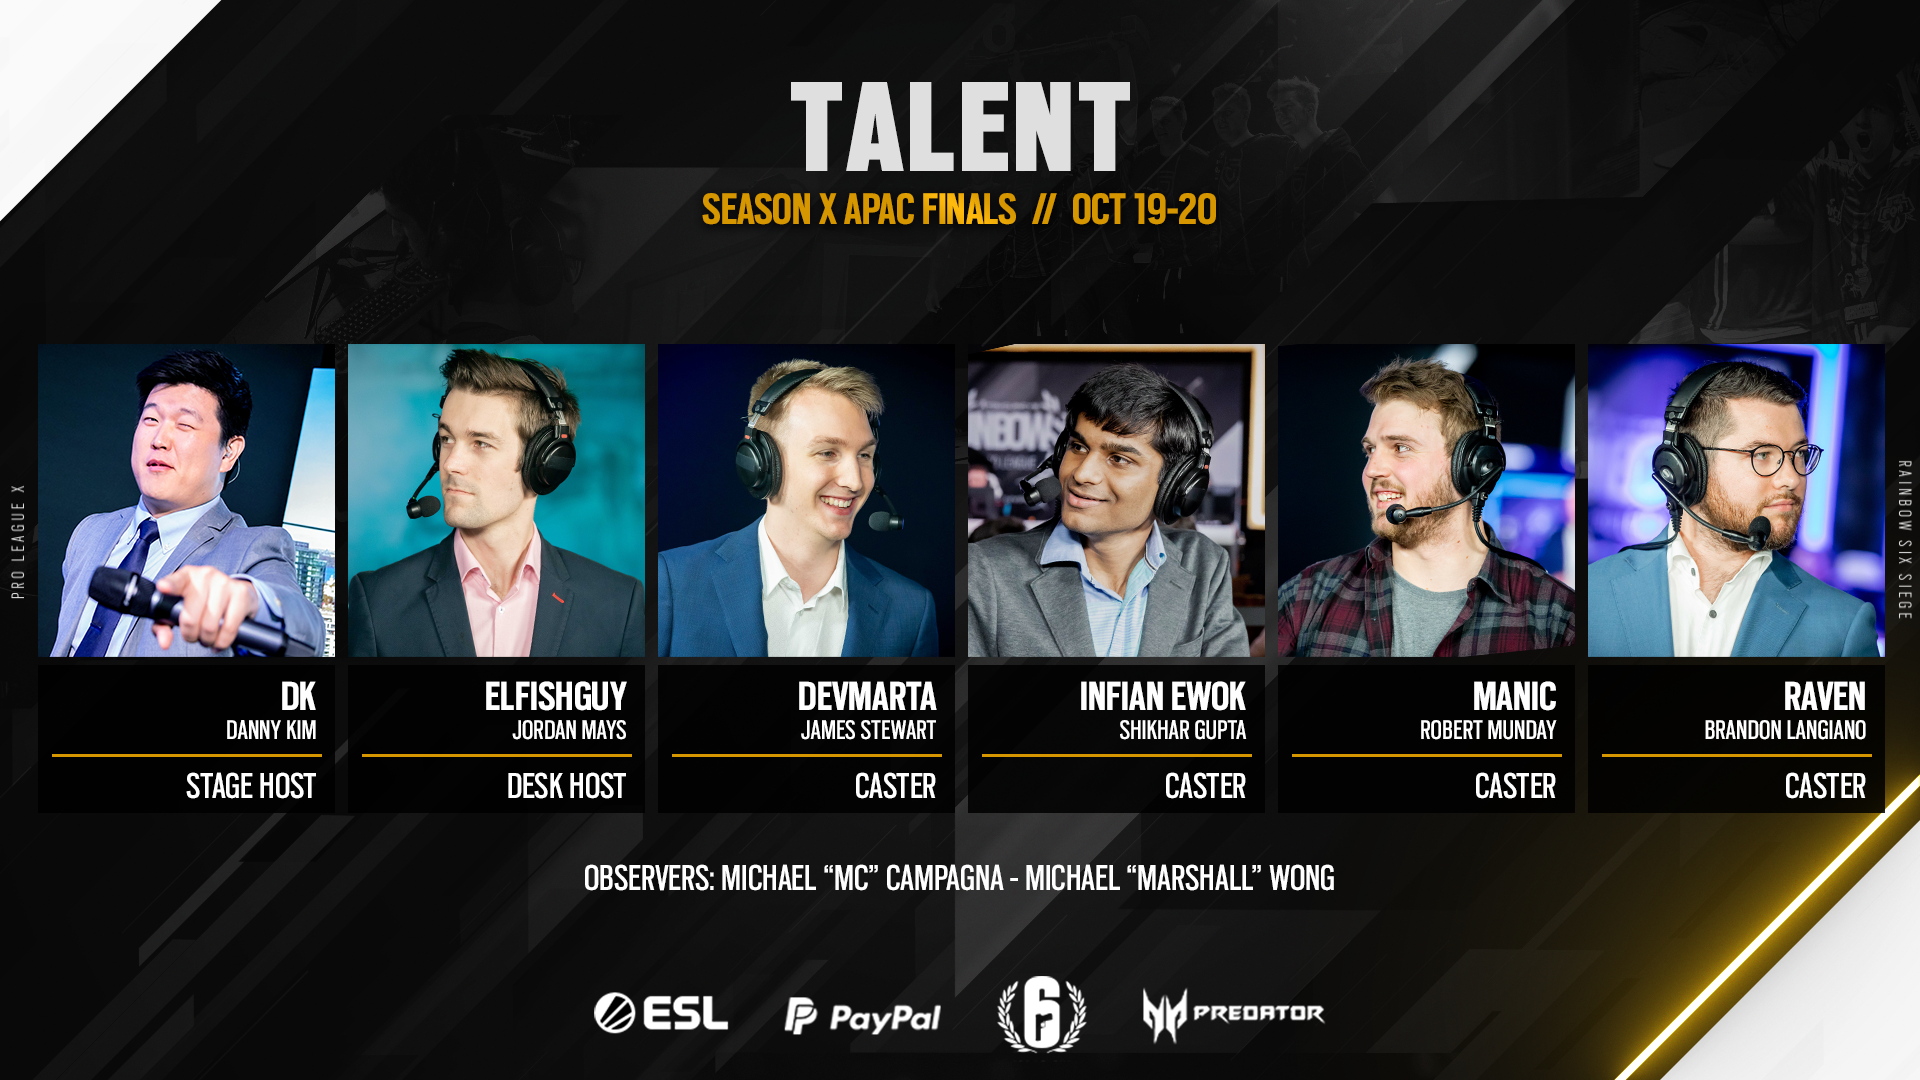 [2019-10-18] TALENT APAC EVENT GUIDE